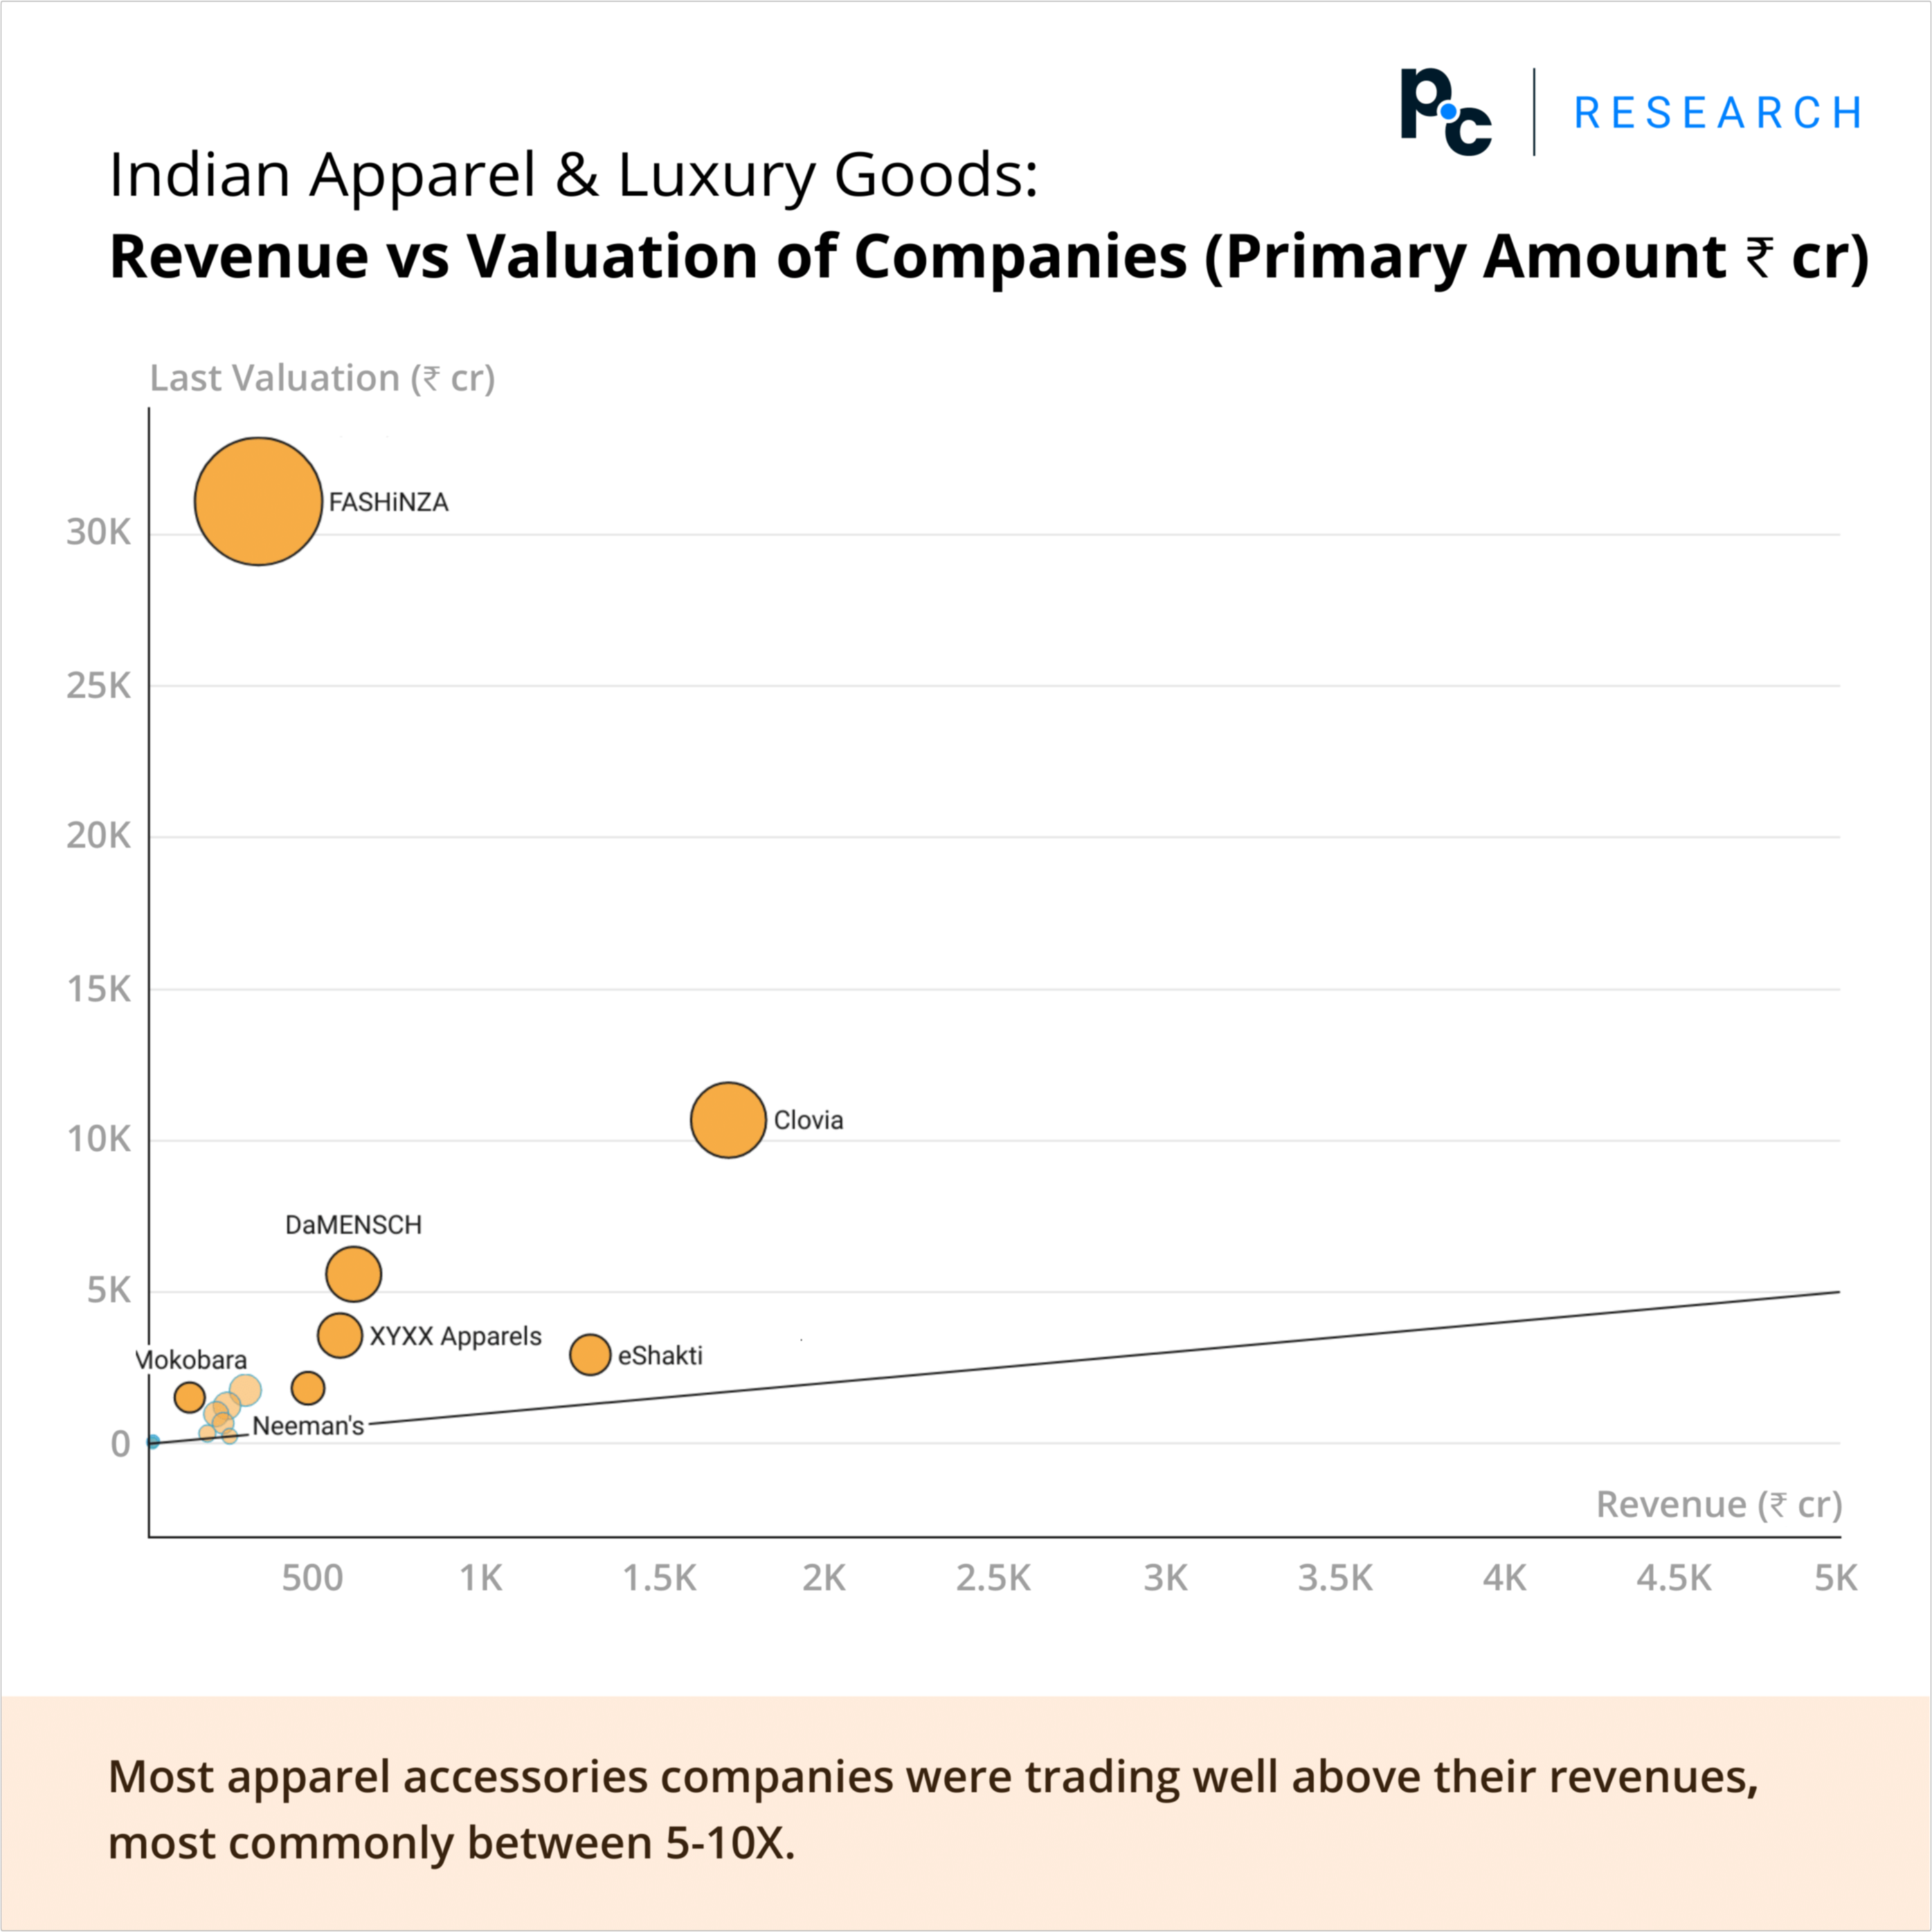 Indian Apparel & Luxury Goods: Revenue vs Valuation of Companies (Primary Amount ₹ cr).

Most apparel accessories companies were trading well above their revenues, most commonly between 5-10X.